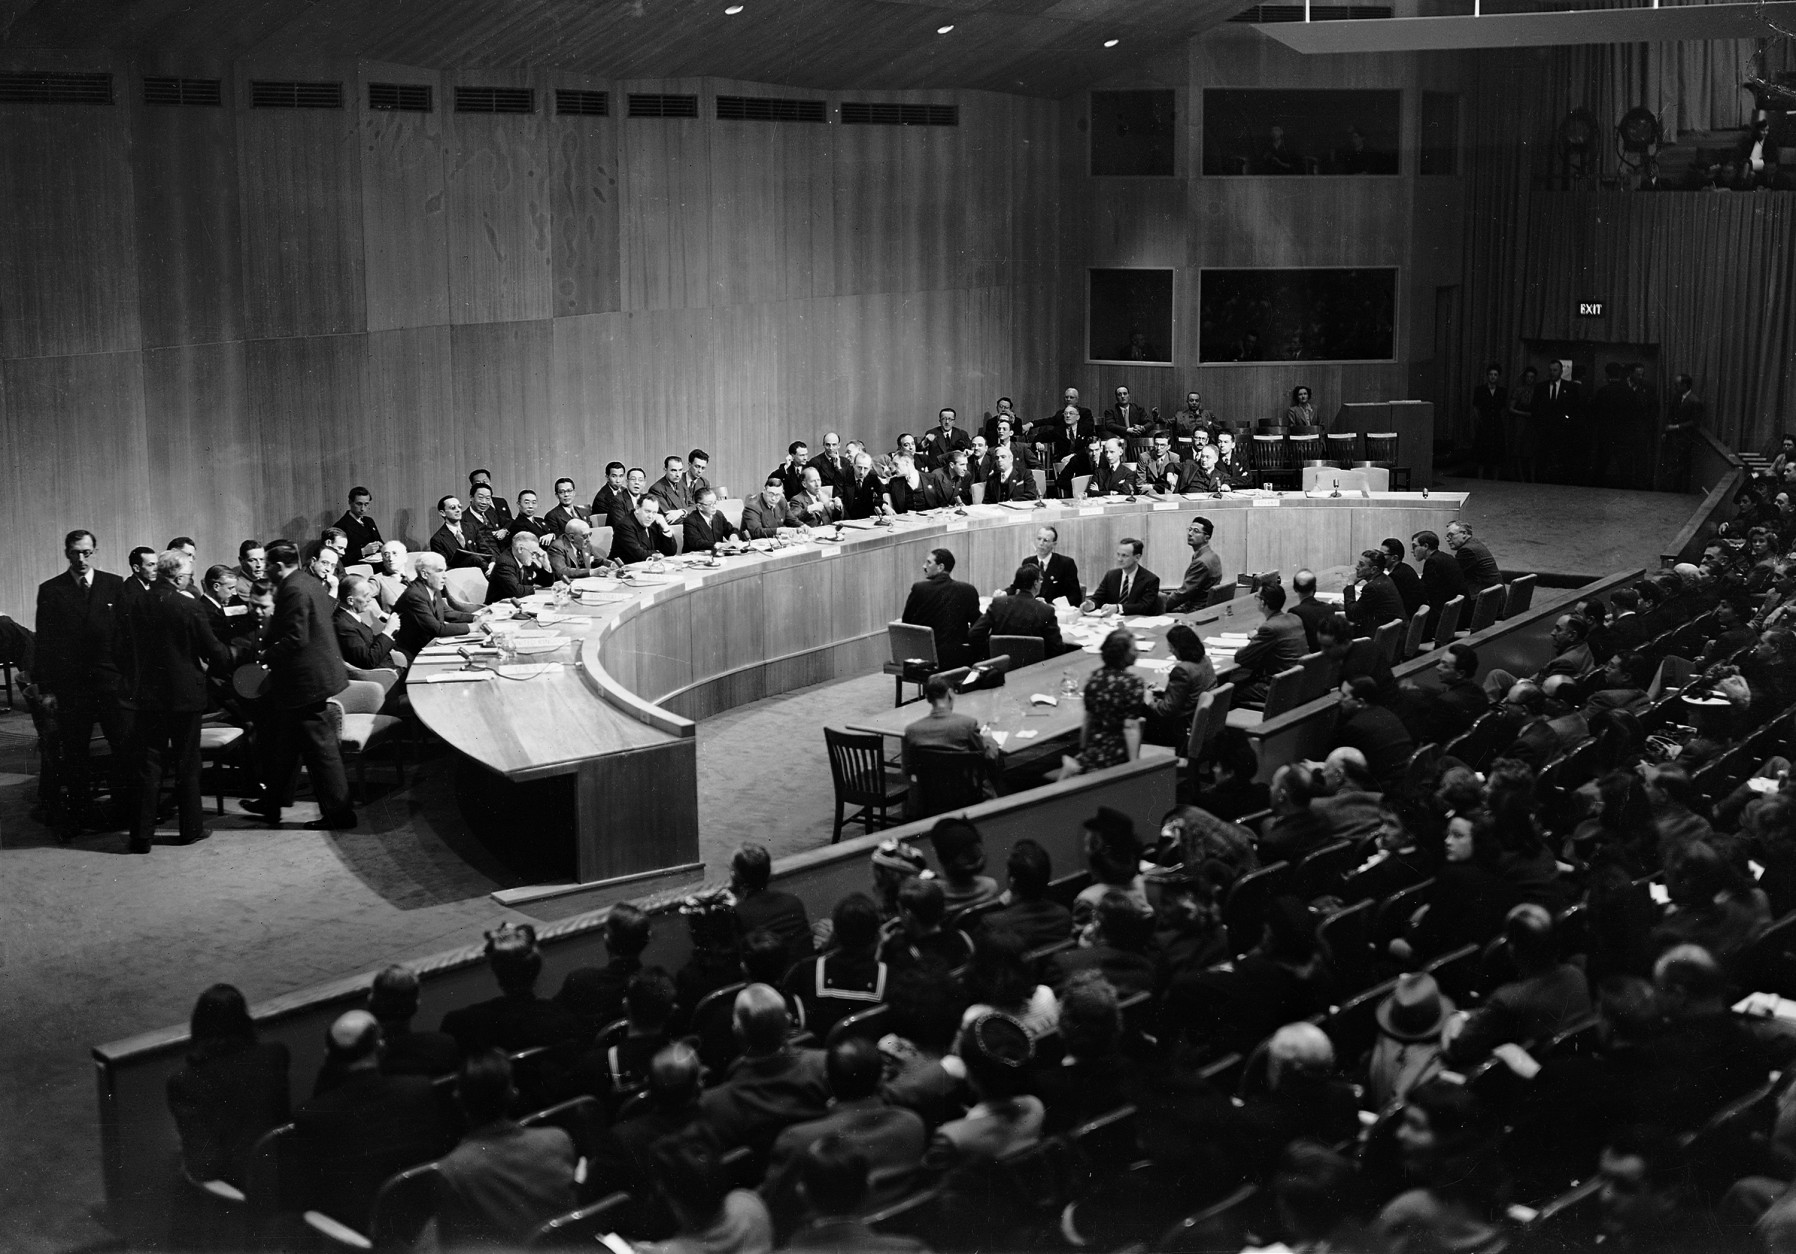 United States Secretary of State James F. Byrnes, seated third at table, watches as Andrei Gromyko, Russian Delegate, standing second from left, leads the Russian delegation from the United Nations Security Council meeting at Hunter College in New York City, March 27, 1946. Standing at left is Prof. Bons Stein, chief Soviet adviser. Seated on Byrnes right are: Edward R. Stettinius, Jr. of the U.S. and Sir Alexander George Montagu Cadogan of the United Kingdom. (AP Photo)